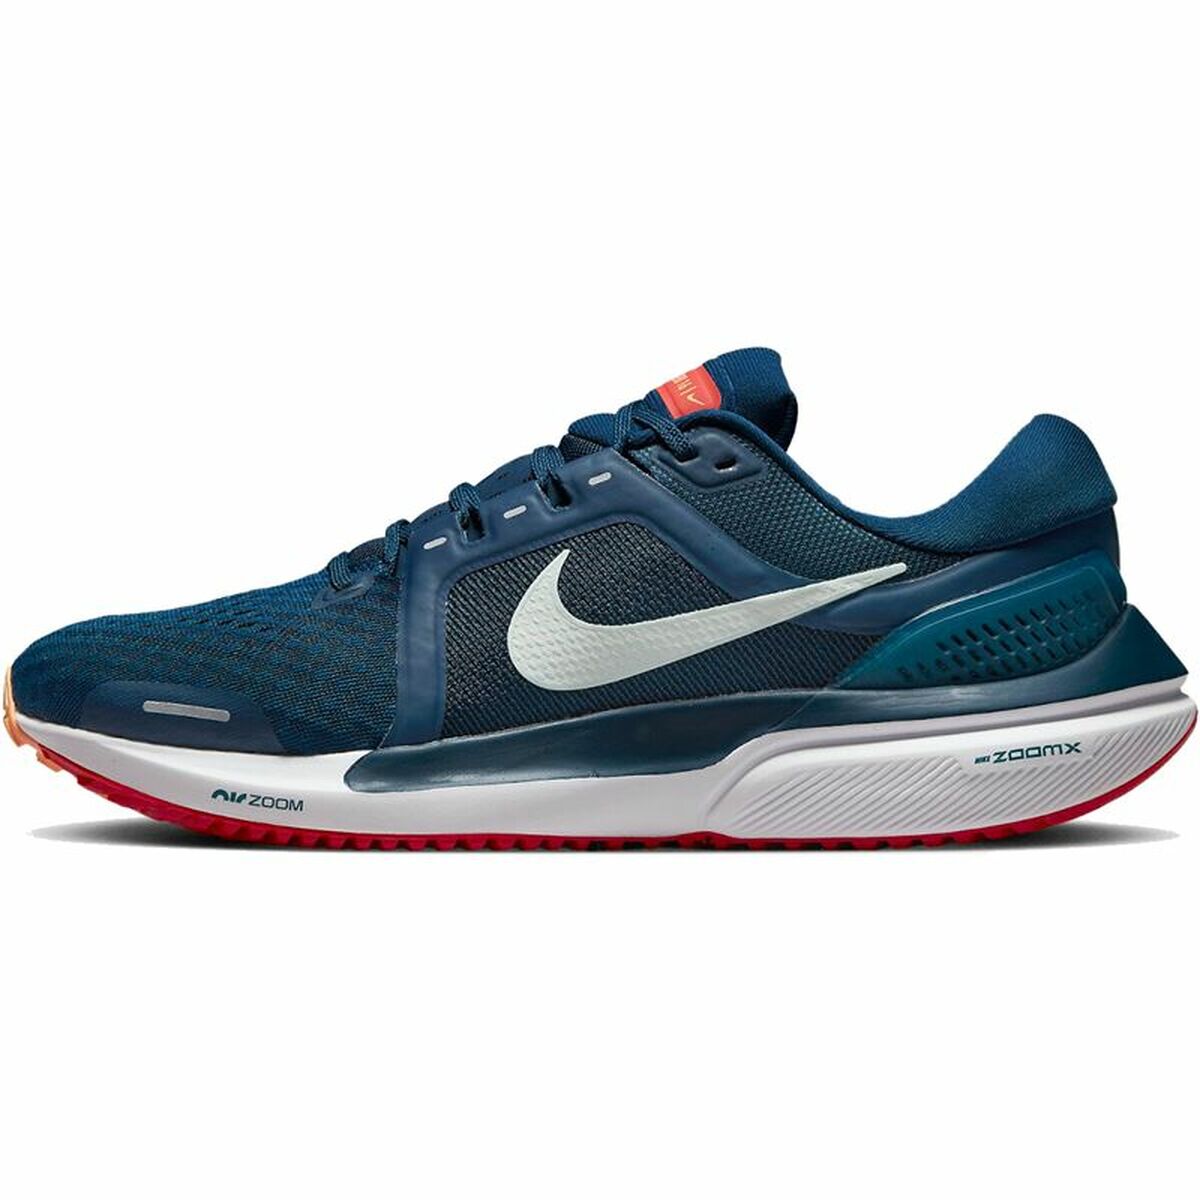 Chaussures de Running pour Adultes Nike Air Zoom Vomero 16 Bleu Homme